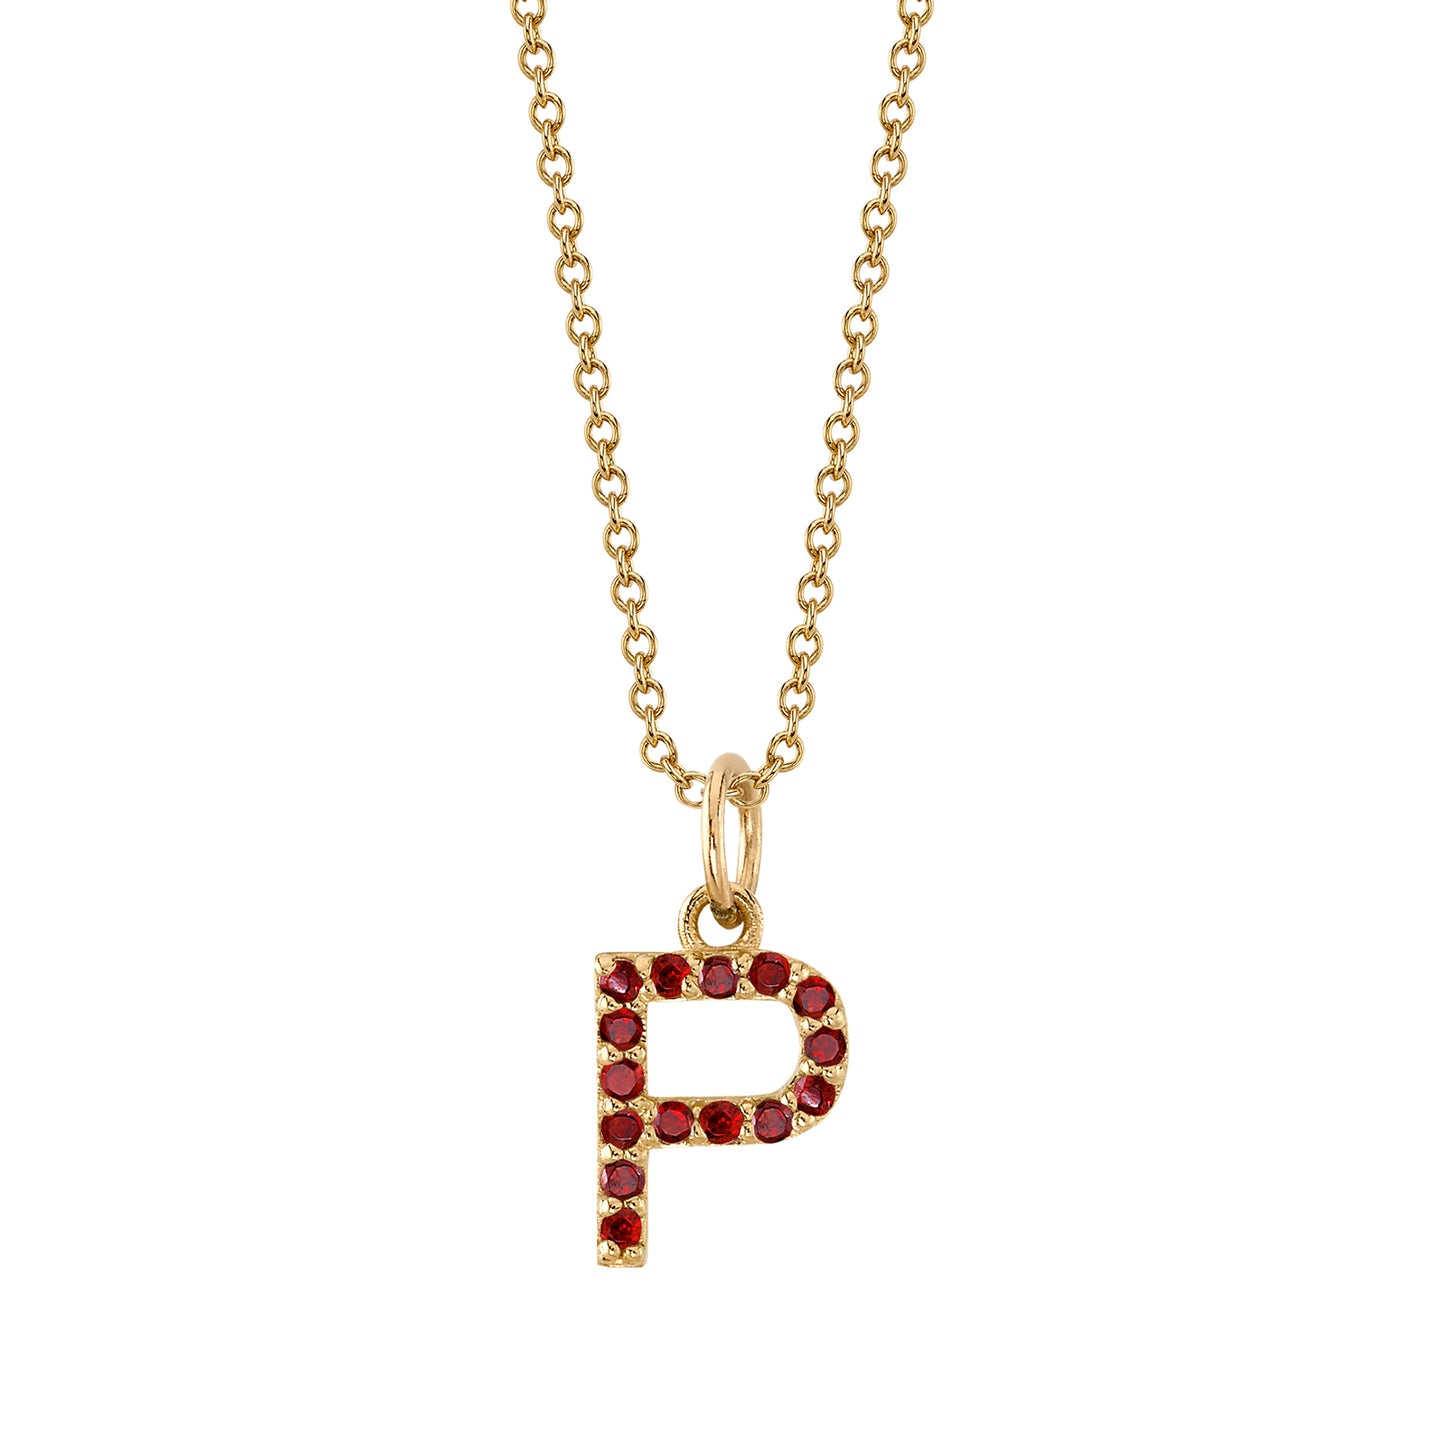 P Initial Birthstone Charm Necklace